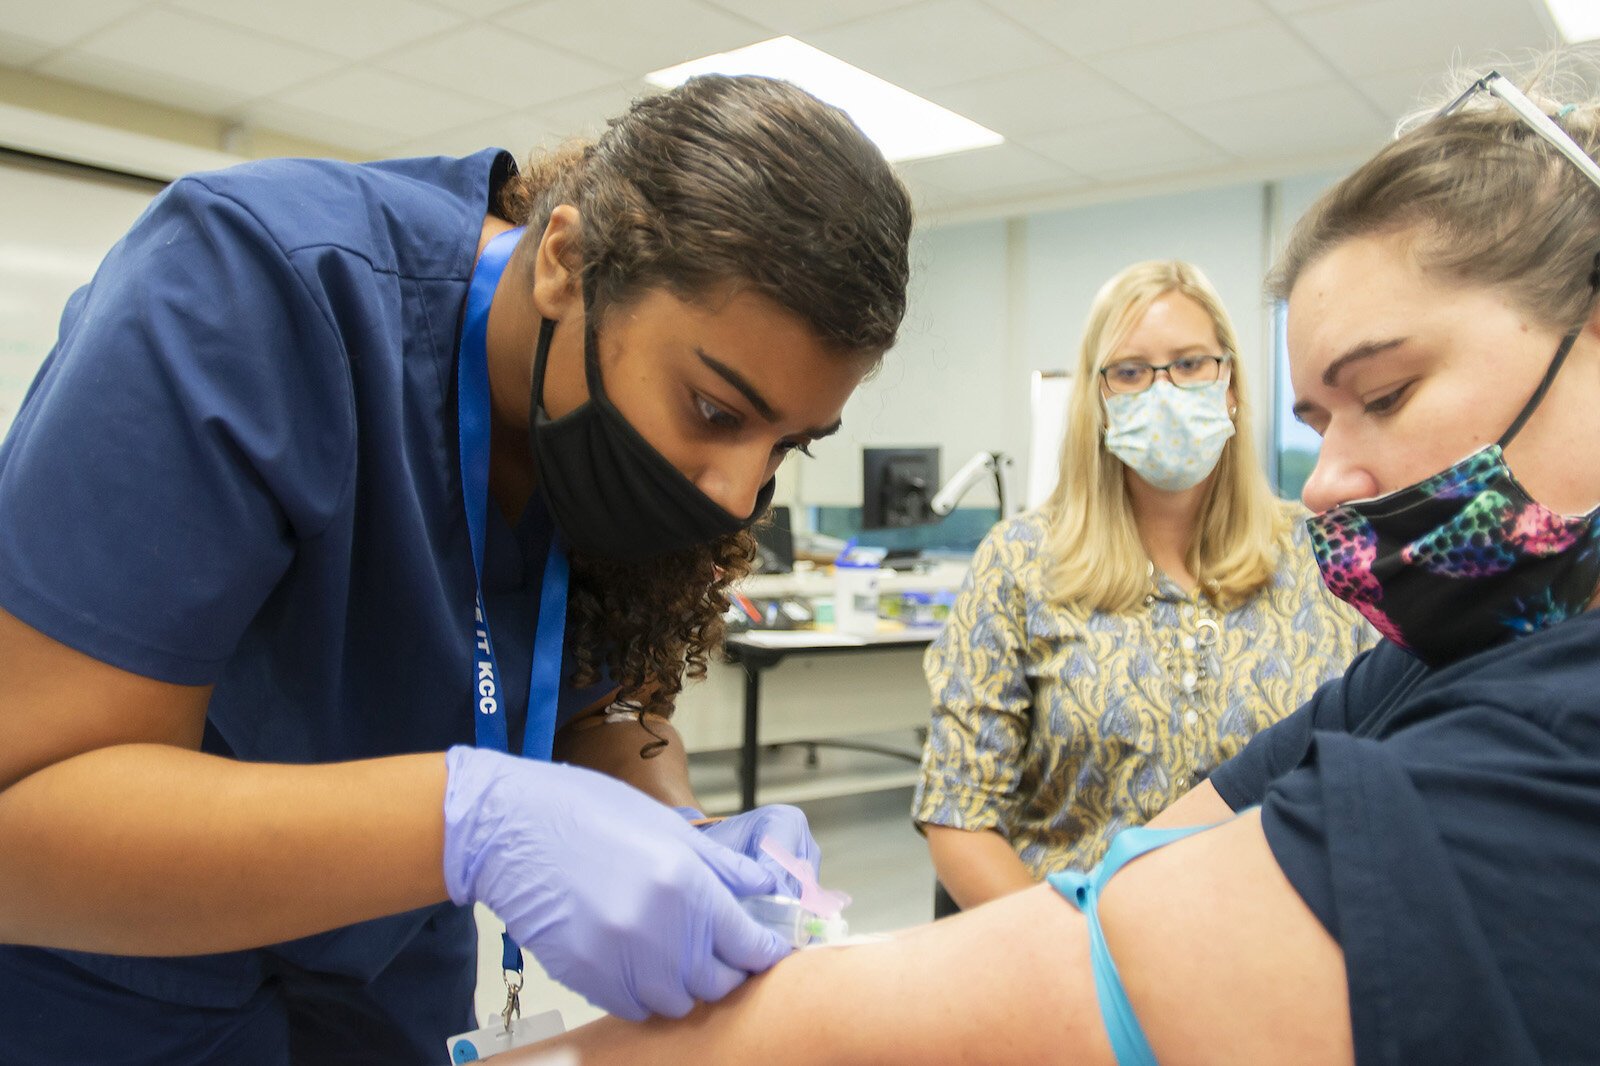 A phlebotomy class at Kellogg Community College.